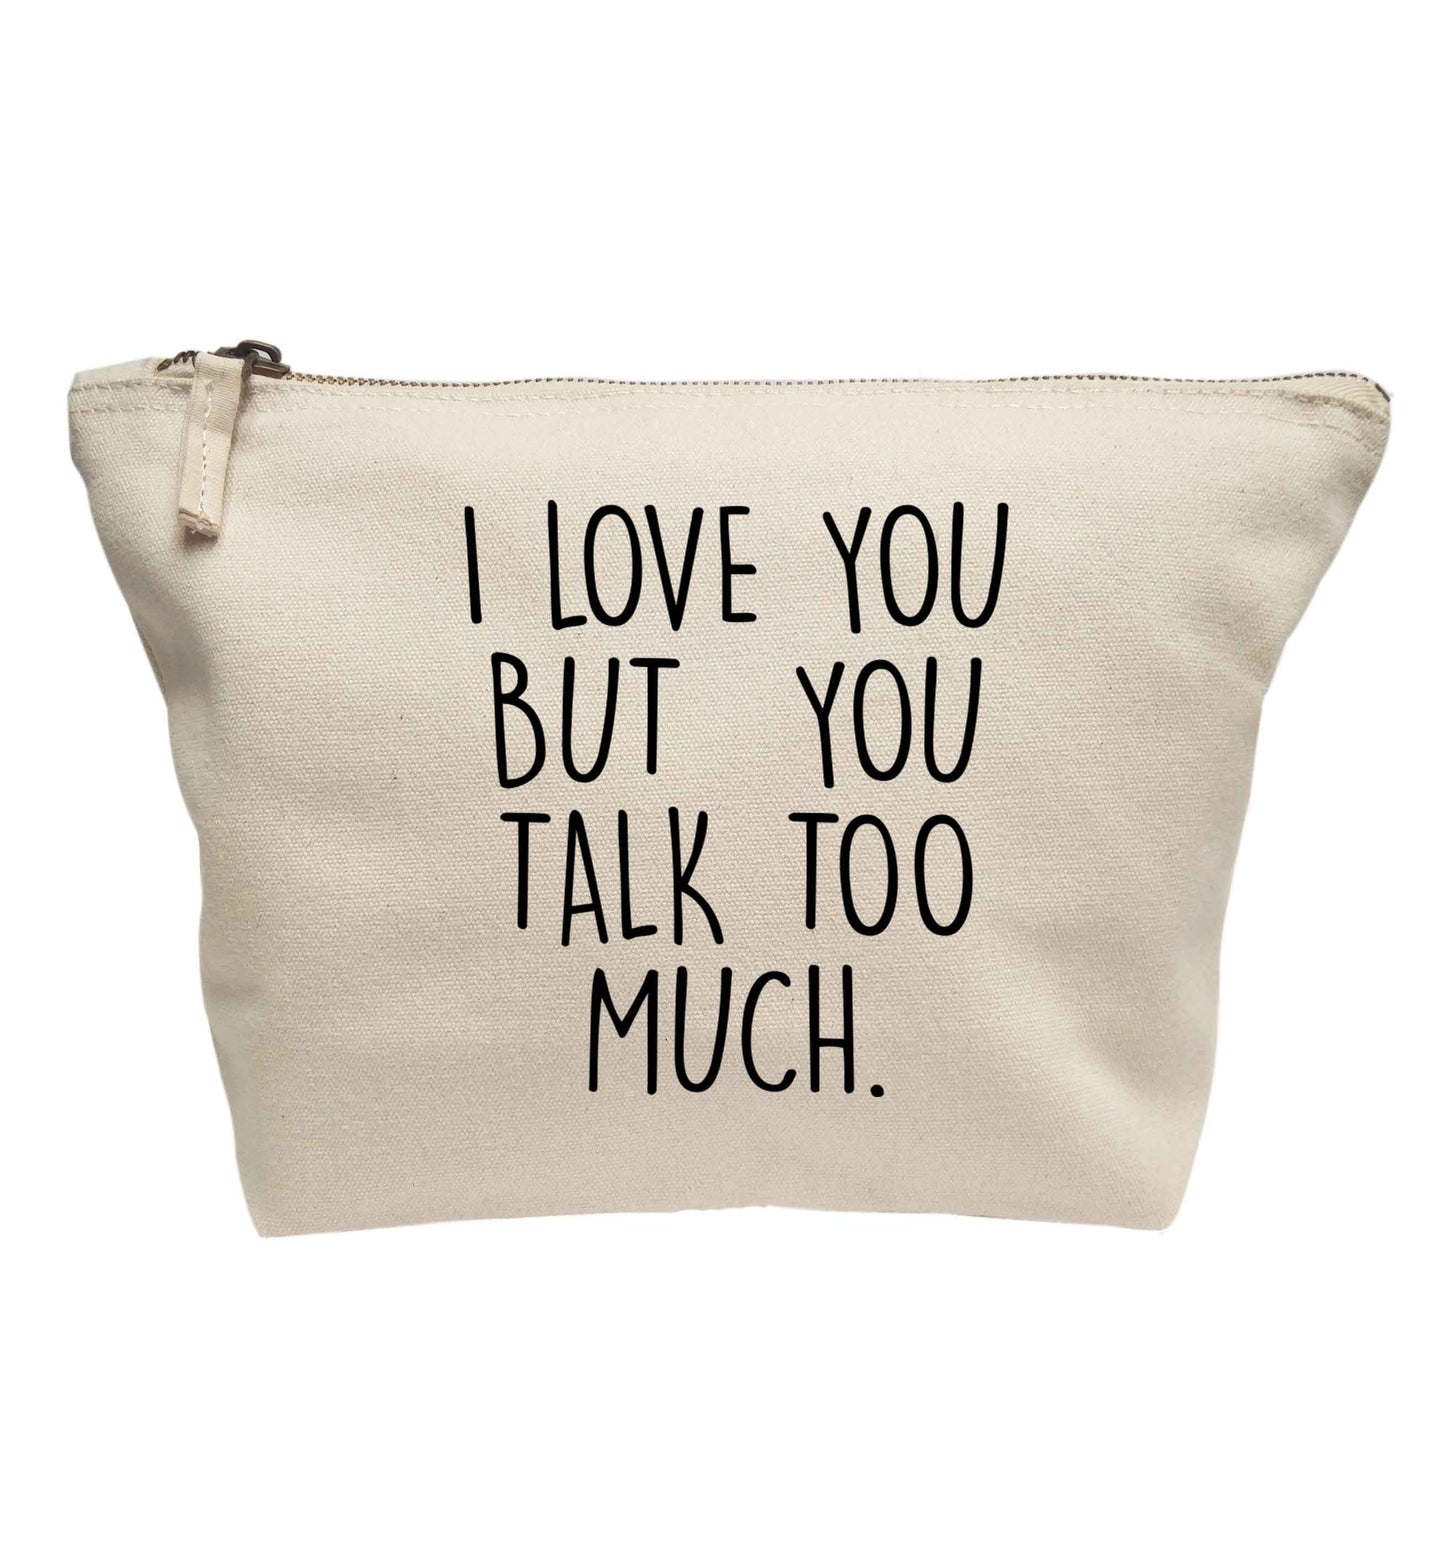 I love you but you talk too much | Makeup / wash bag